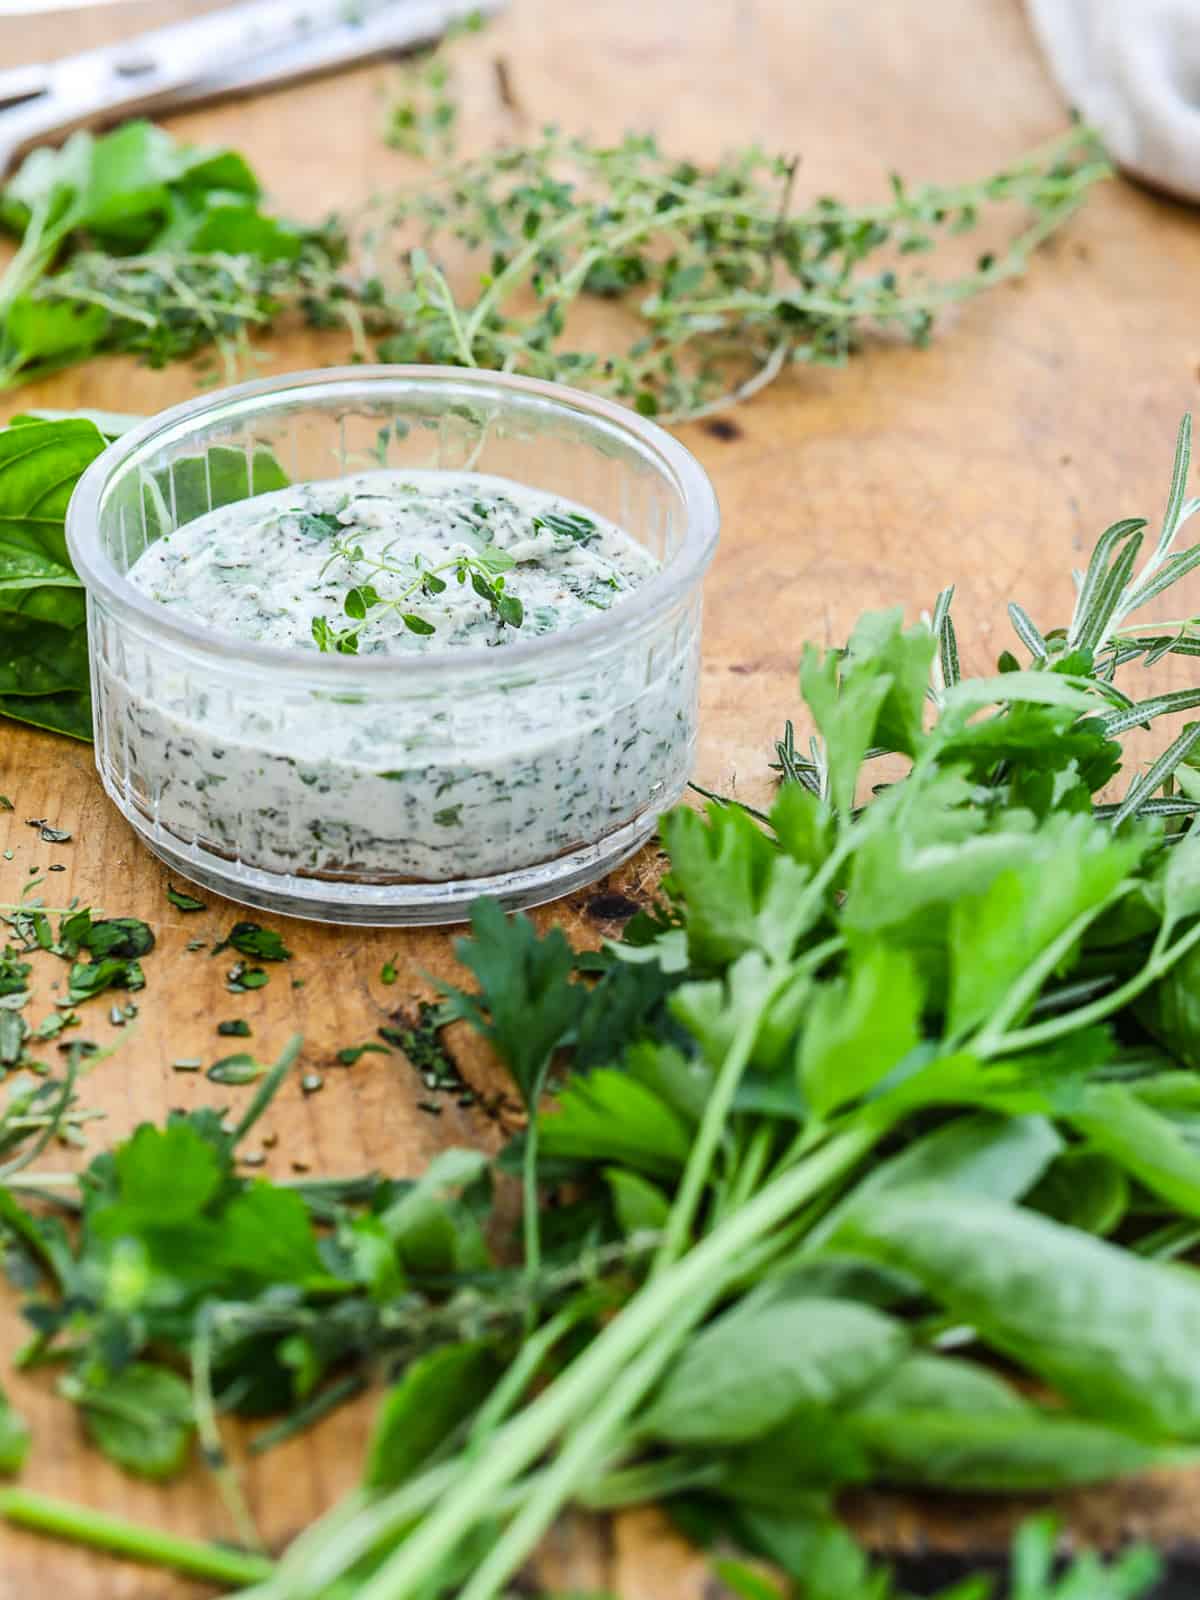 https://www.delicioustable.com/wp-content/uploads/2023/05/Herb-butter-with-fresh-herbs-on-board.jpg